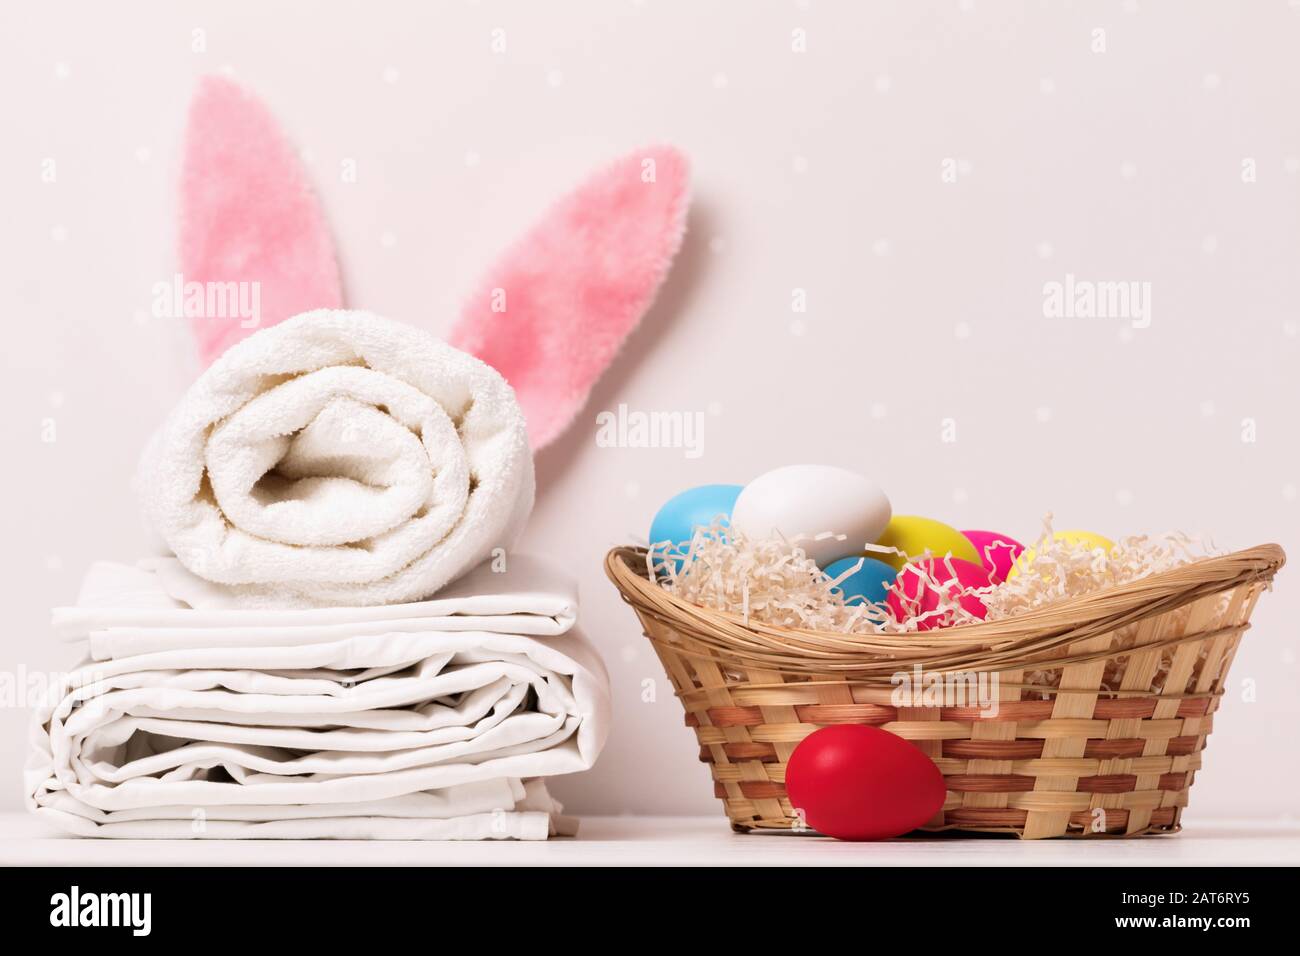 A close-up of a stack of clean white bedding, towels and Easter bunny ears, a basket of eggs on a table, against a background of light walls. Stock Photo